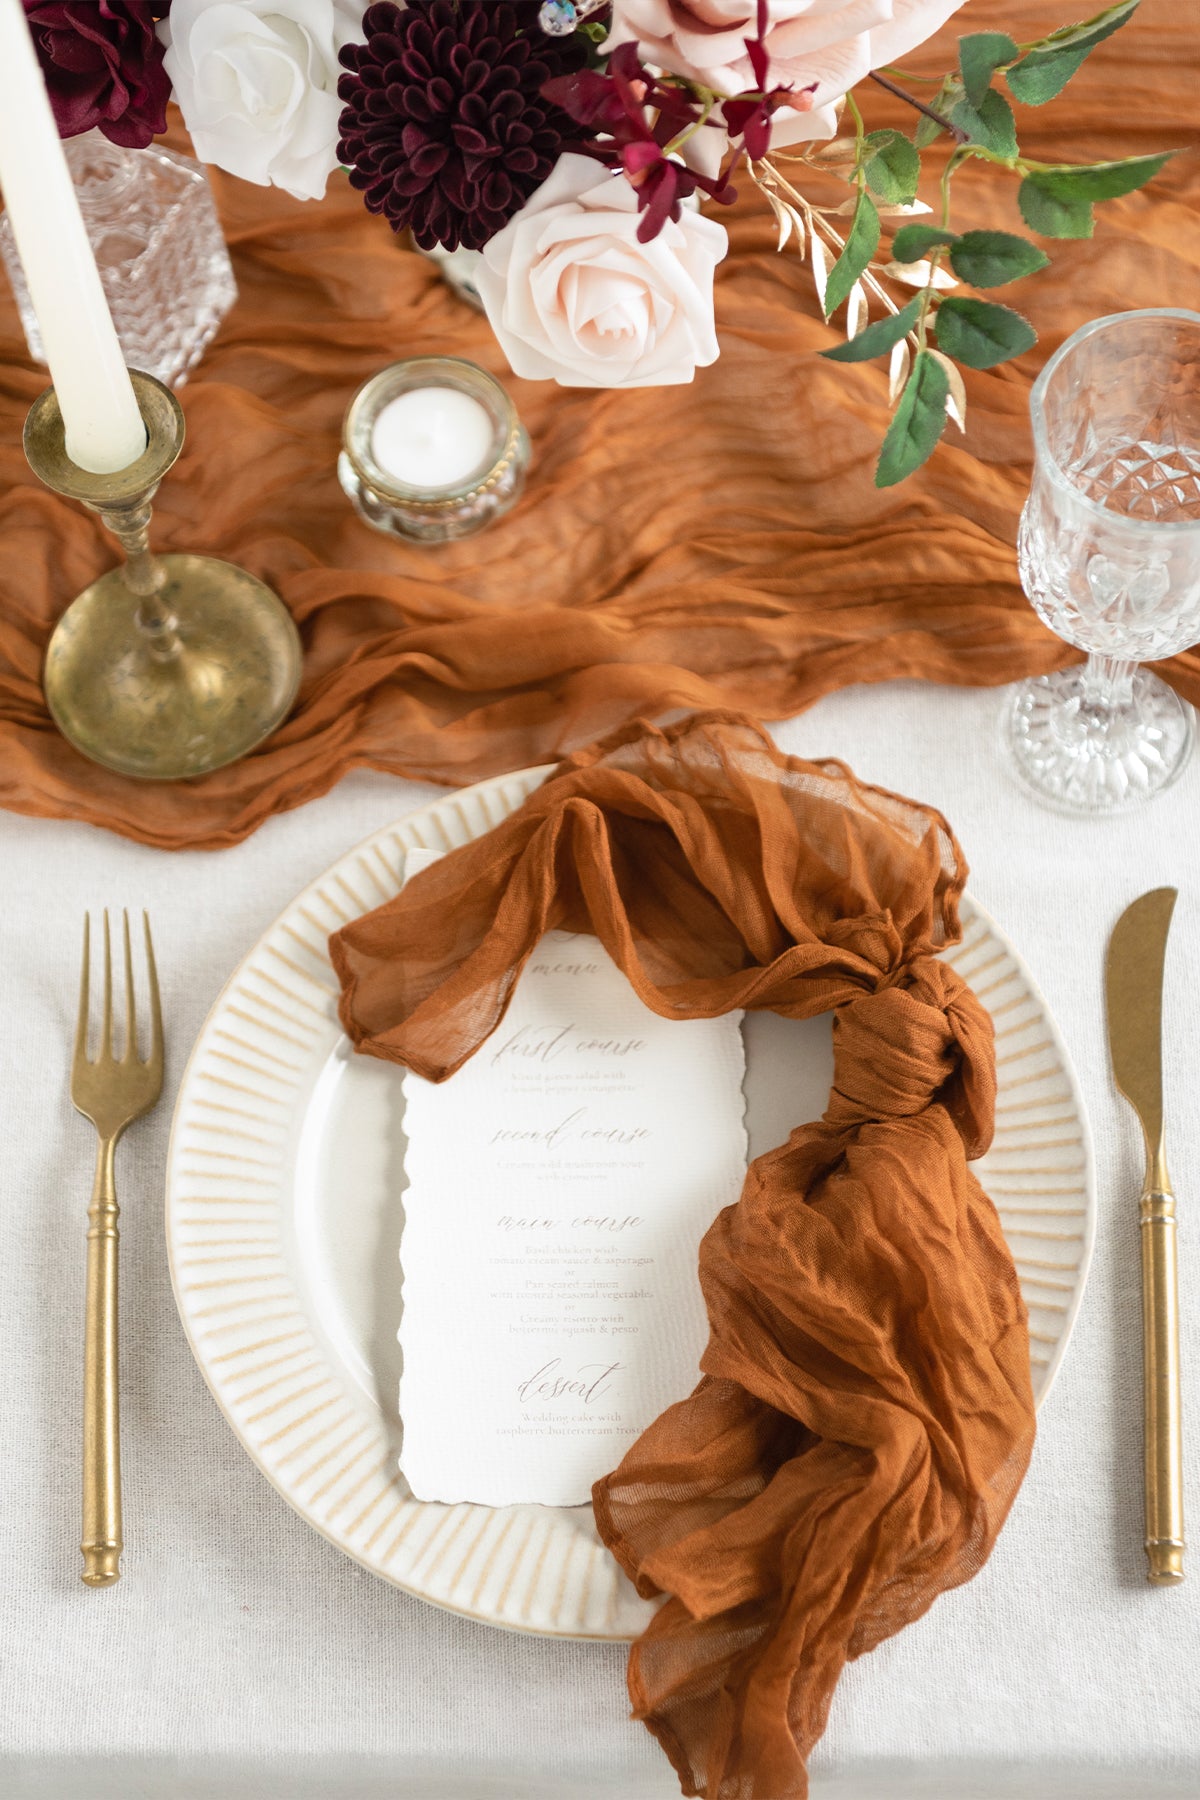 Cheesecloth Napkins & Table Runner Set for Reception - 6 Colors